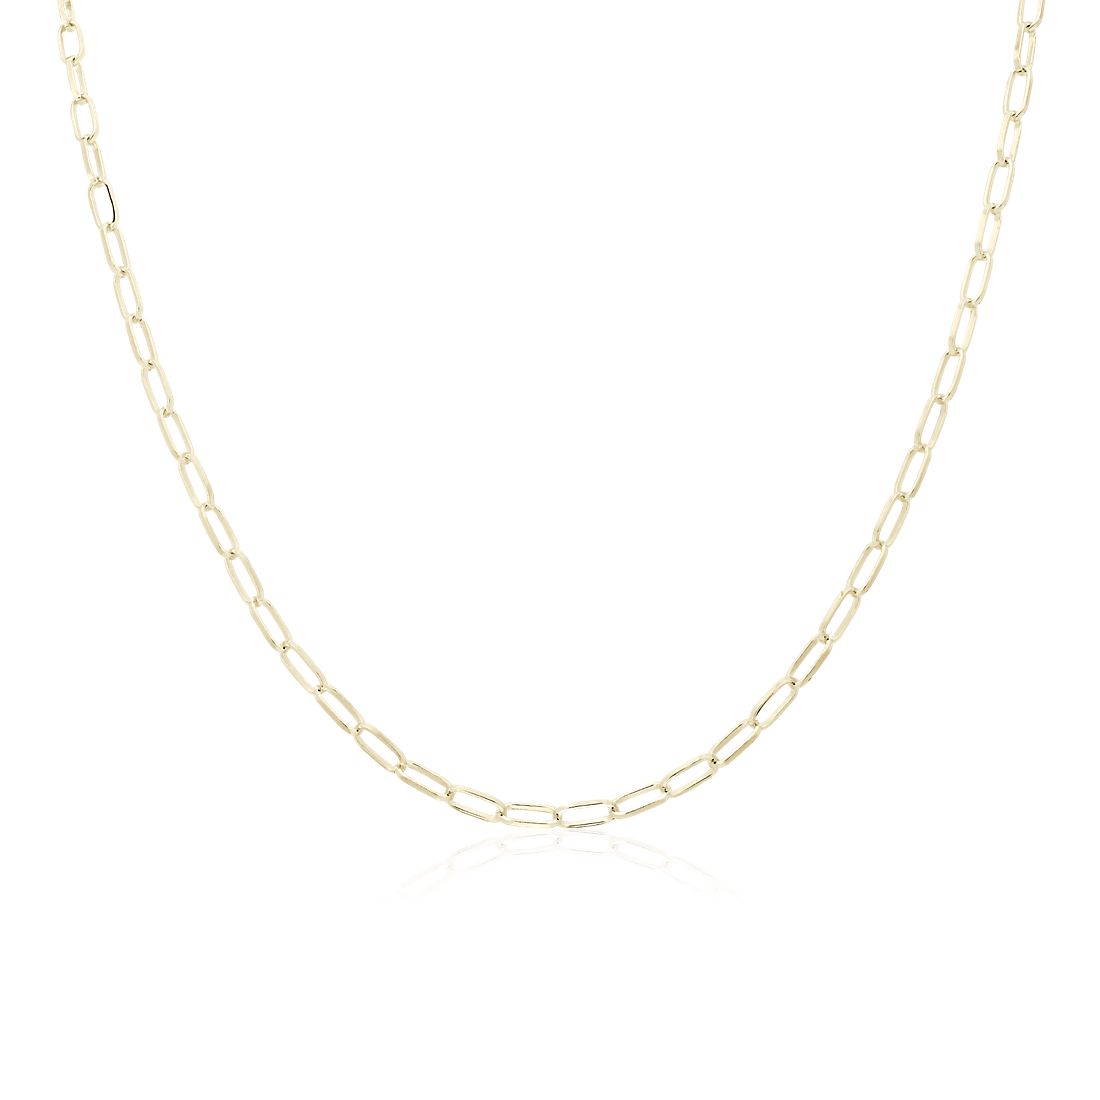 18" Small Paperclip Chain in Solid 14k Yellow Gold (2.4 mm)